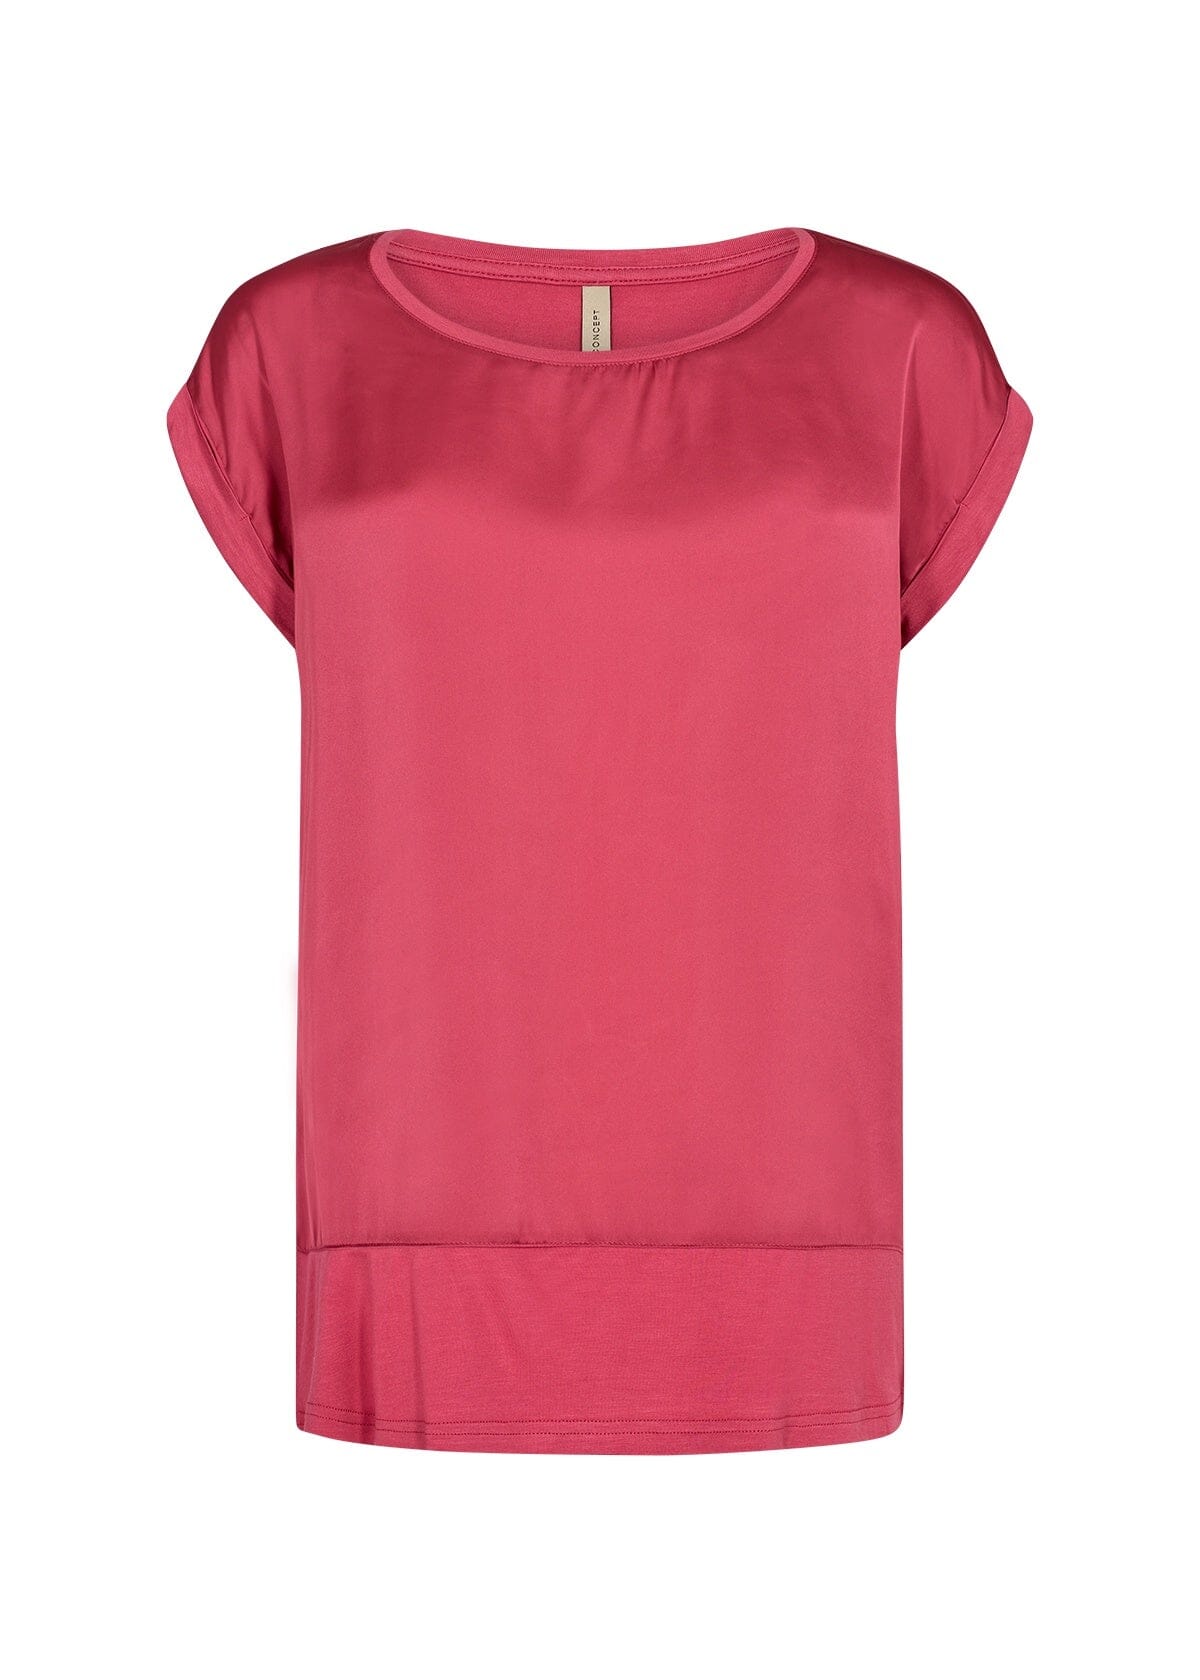 Thilde T-Shirt in Berry T-Shirt Soyaconcept 